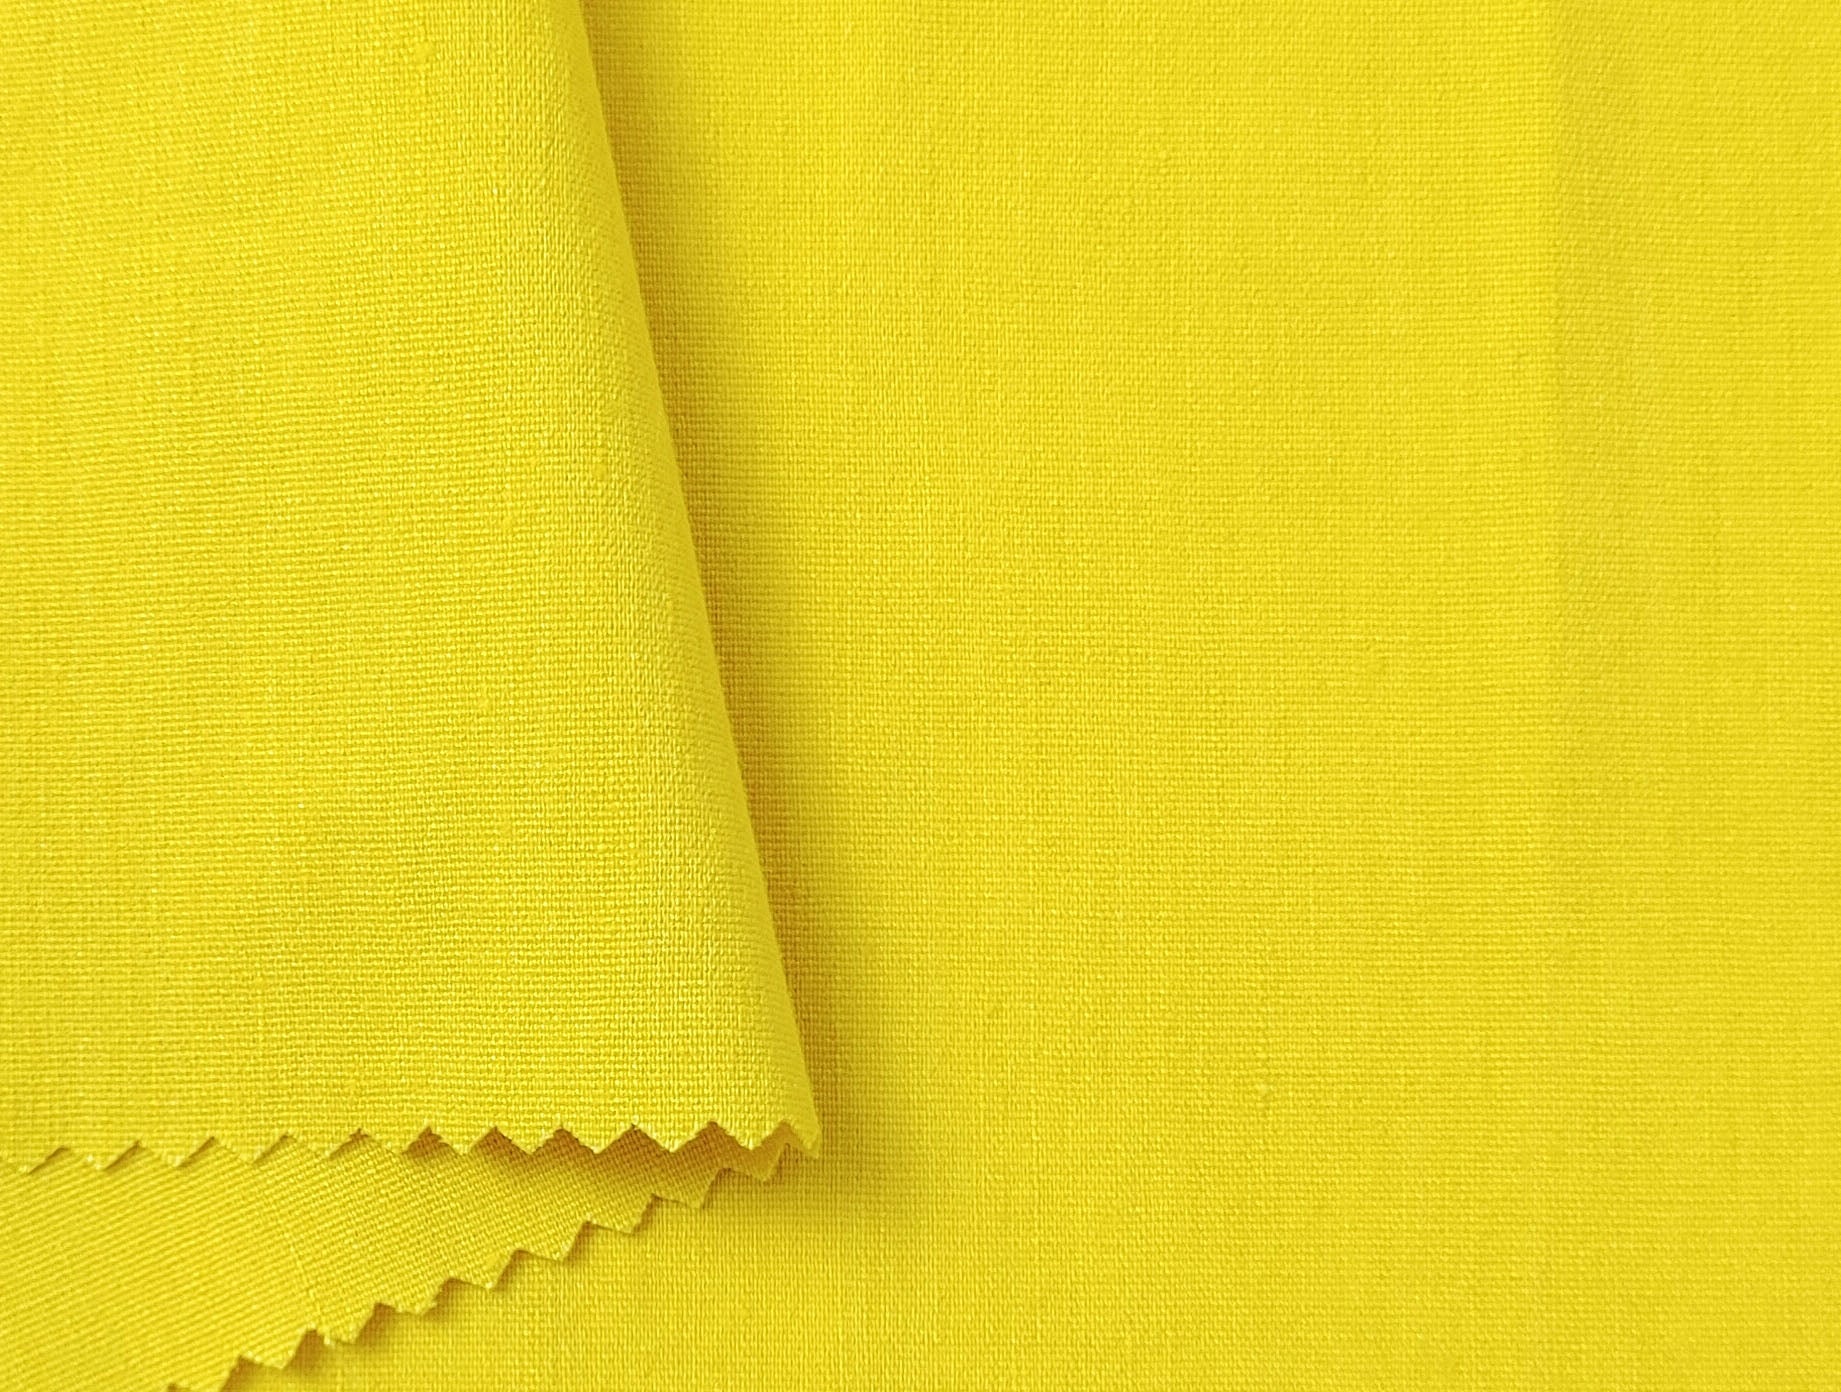 Donna Linen - High Density Linen Rayon Stretch Fabric 4025 4024 5982 4803 4579 4578 4023 3978 - The Linen Lab - Yellow